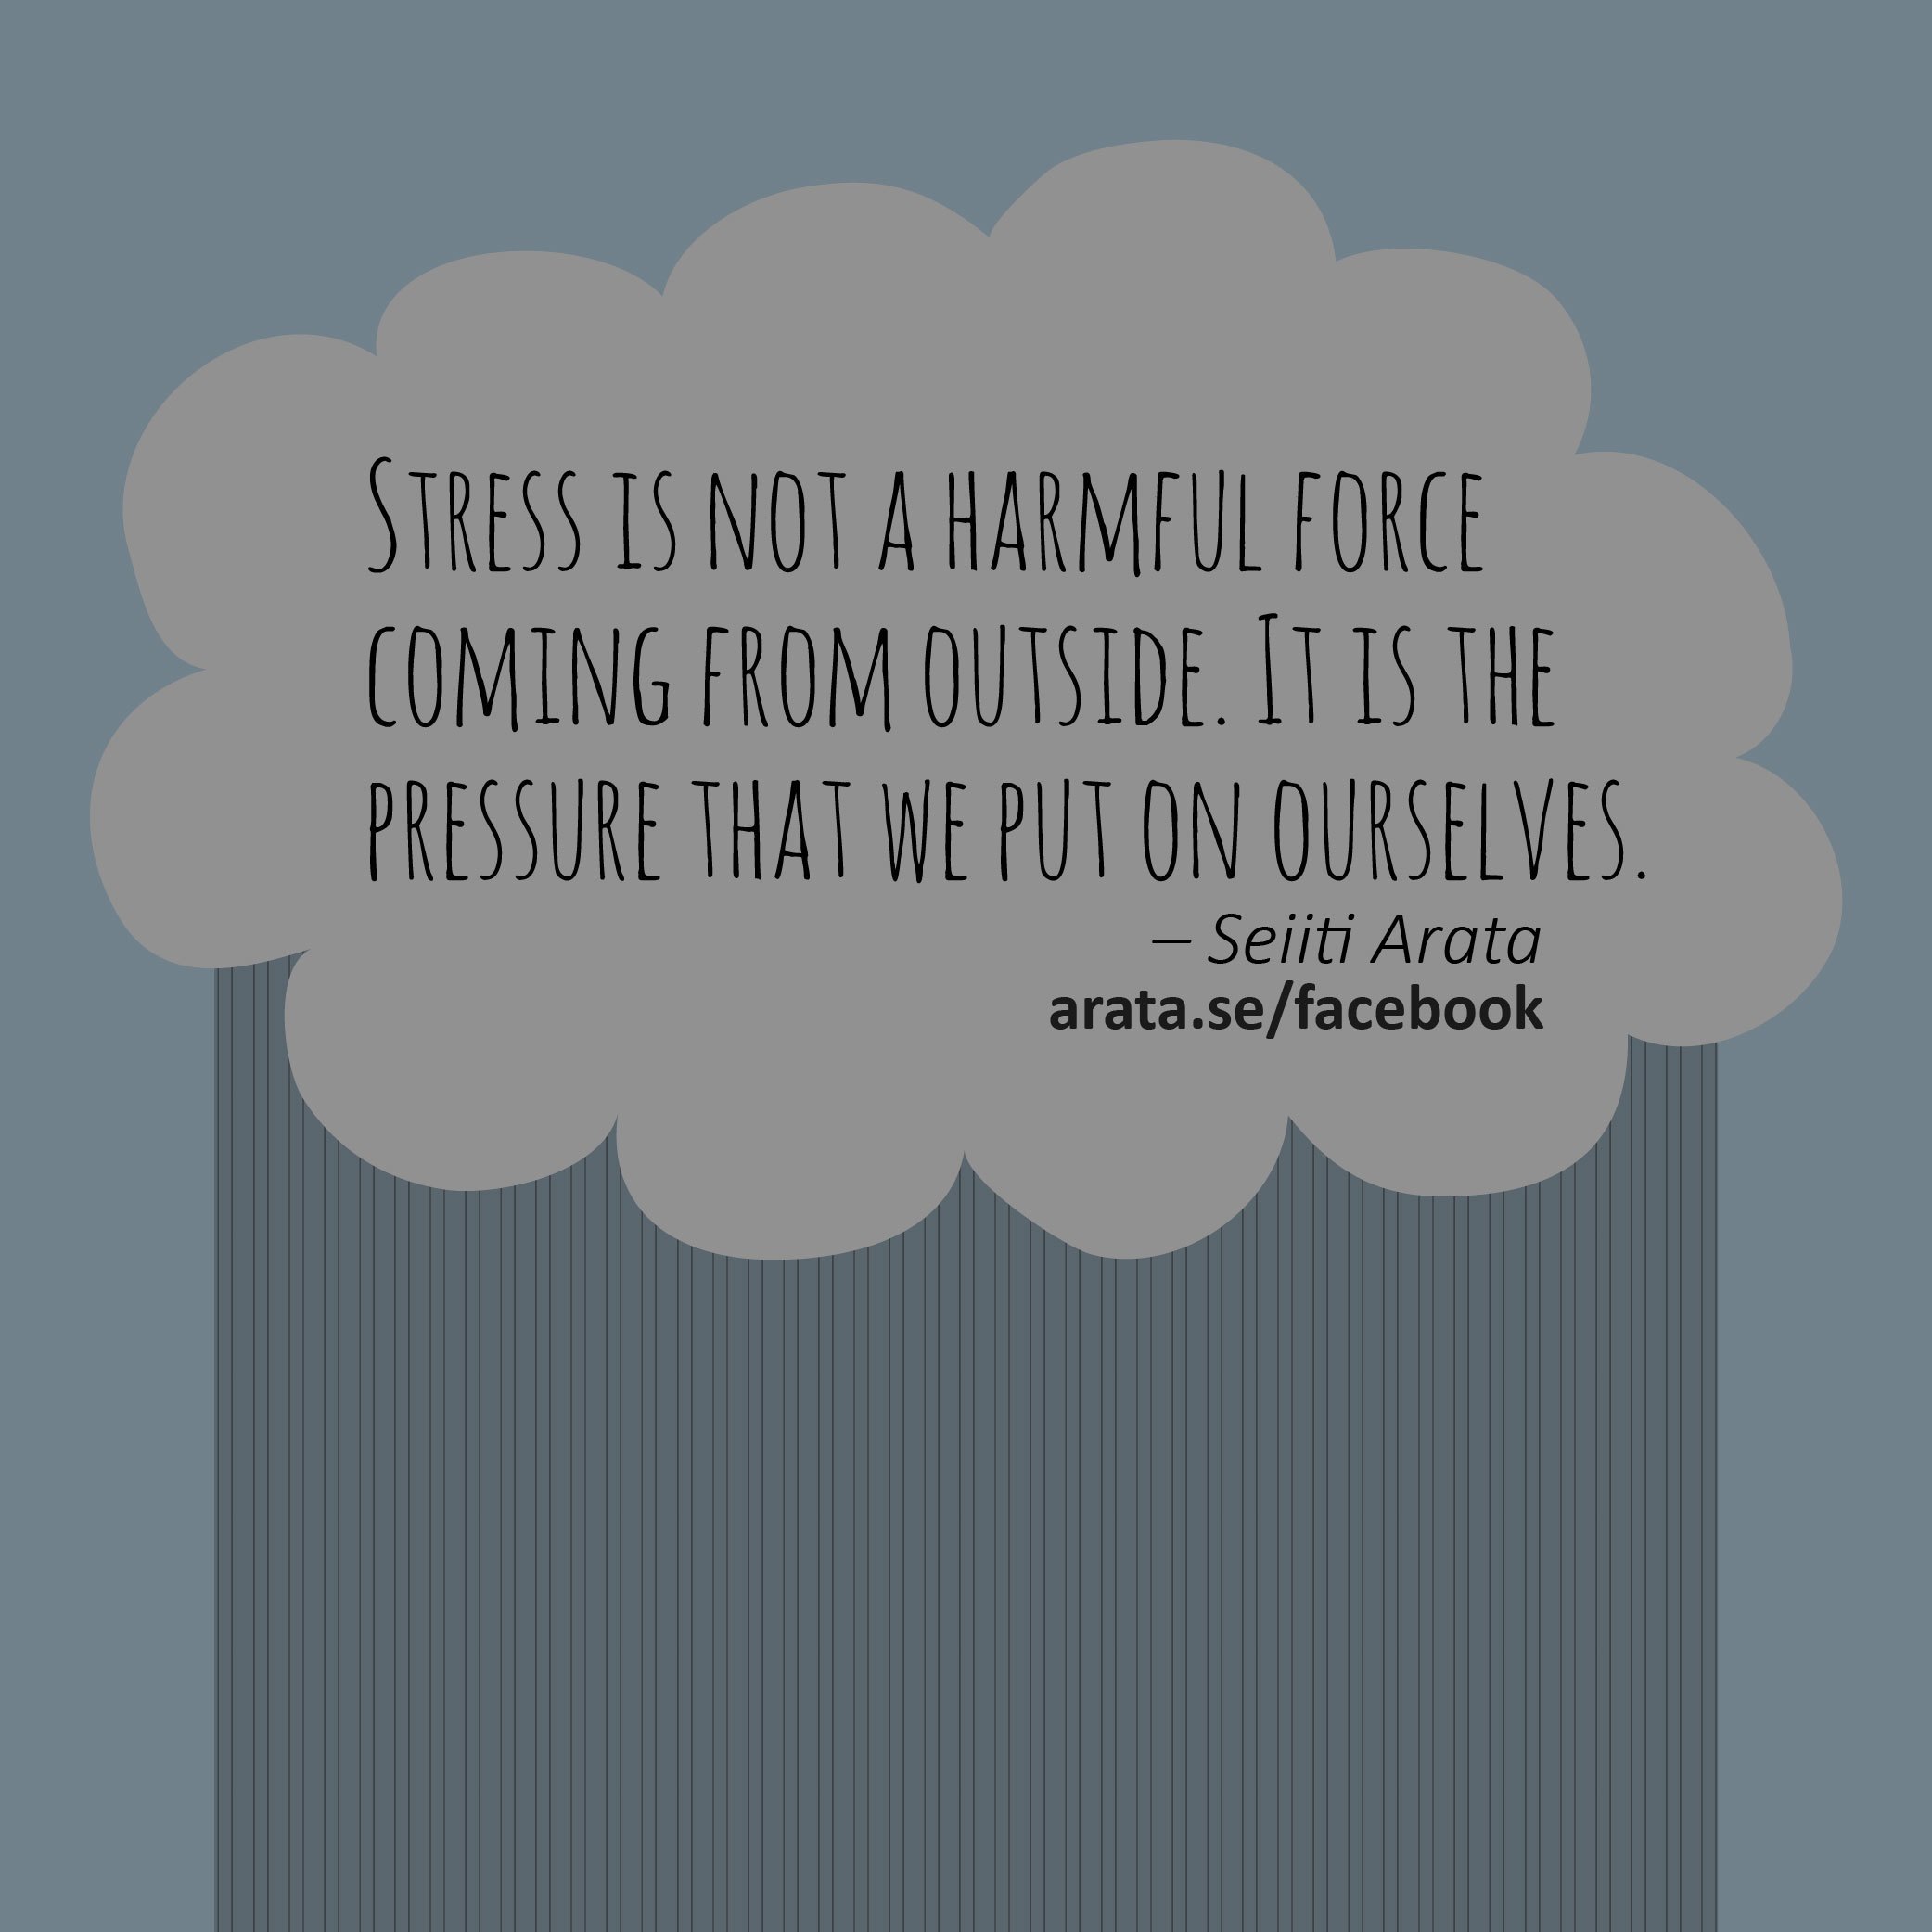 Stress is not a harmful force coming from outside. It is the pressure that we put on ourselves.